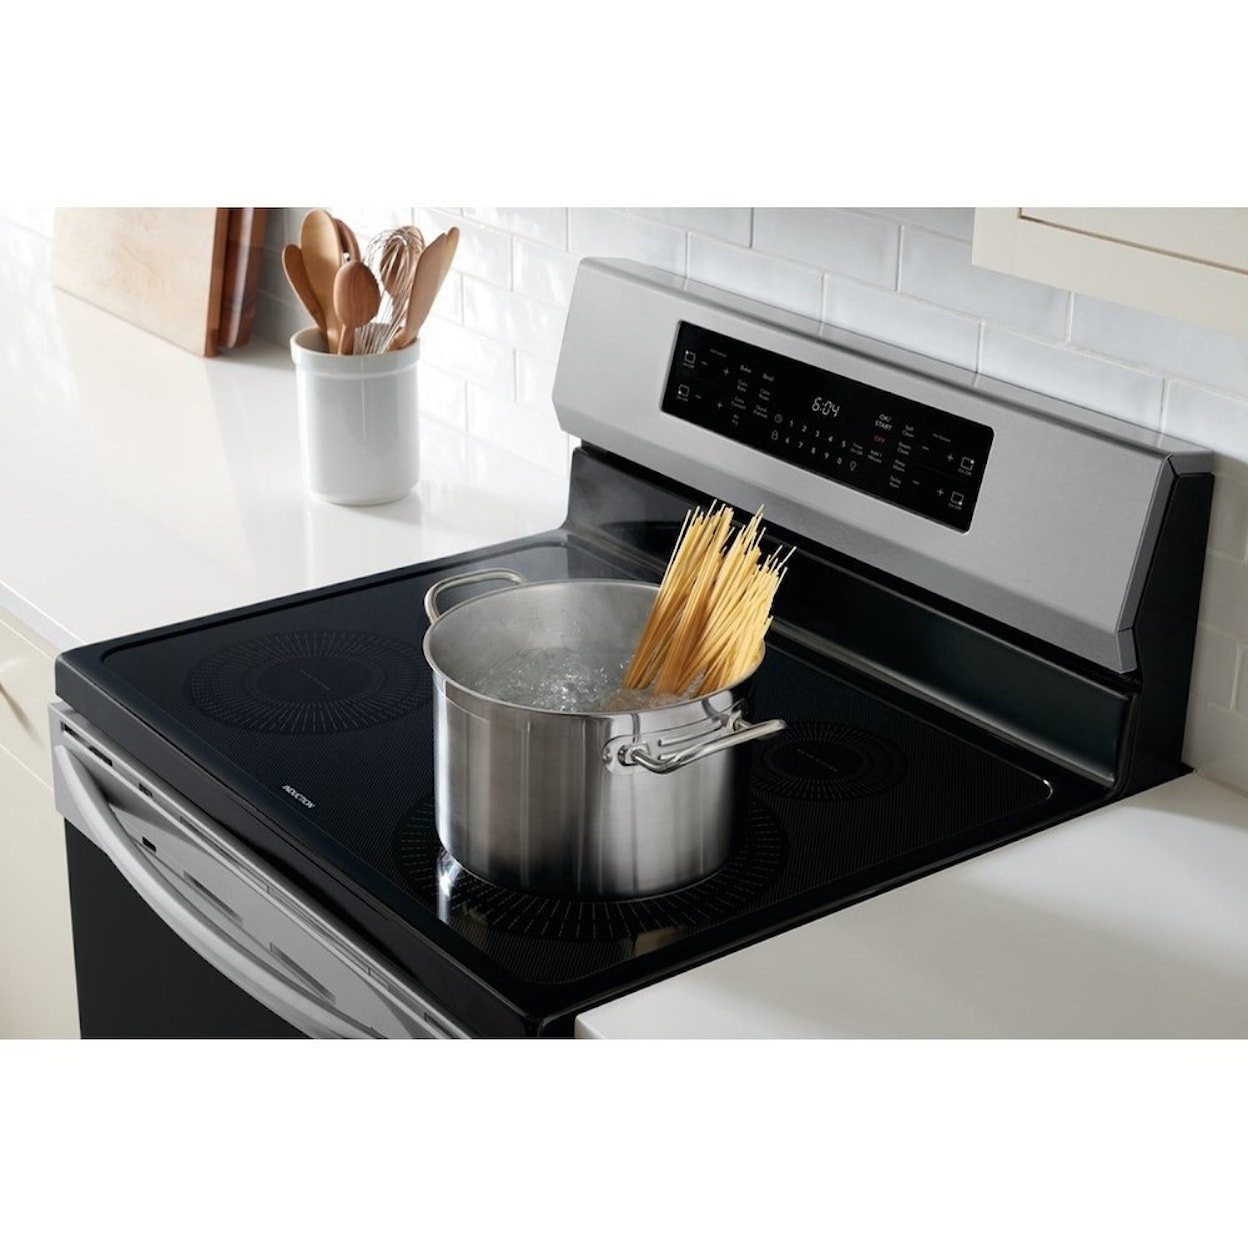 Frigidaire Frigidaire Gallery Electric Ranges 30" Freestanding Induction Range w/ Air Fry